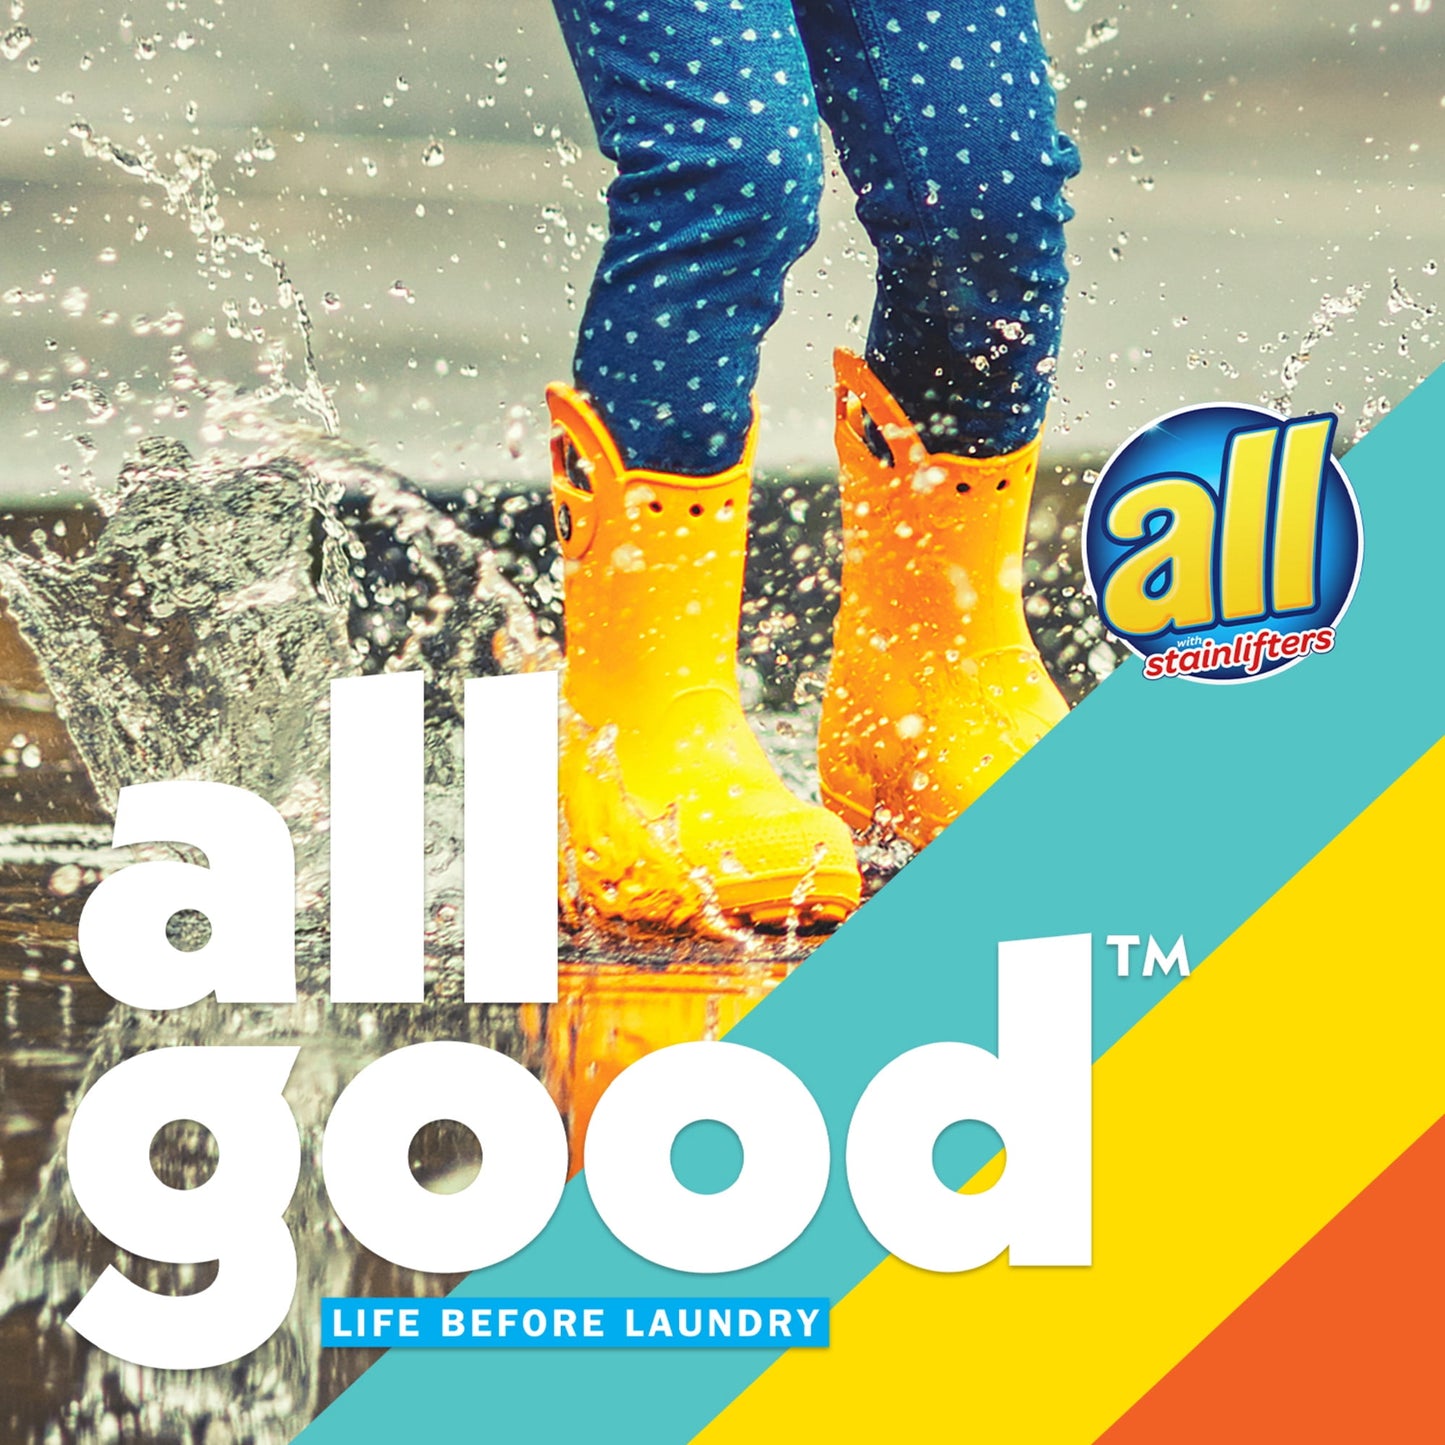 all Liquid Laundry Detergent, 4 in 1 with Stainlifters, Sunshine Fresh, 40 Ounces, 26 Wash Loads